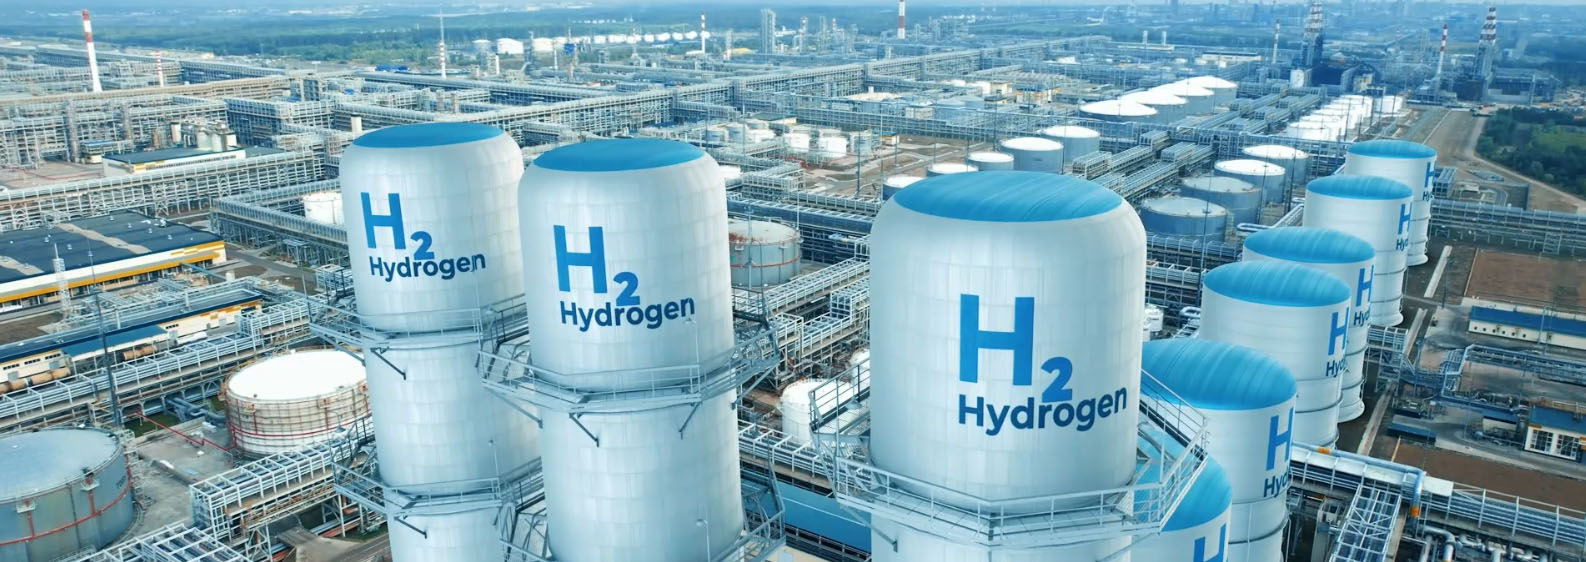 Hybrid burners with hydrogen content in reheating furnaces